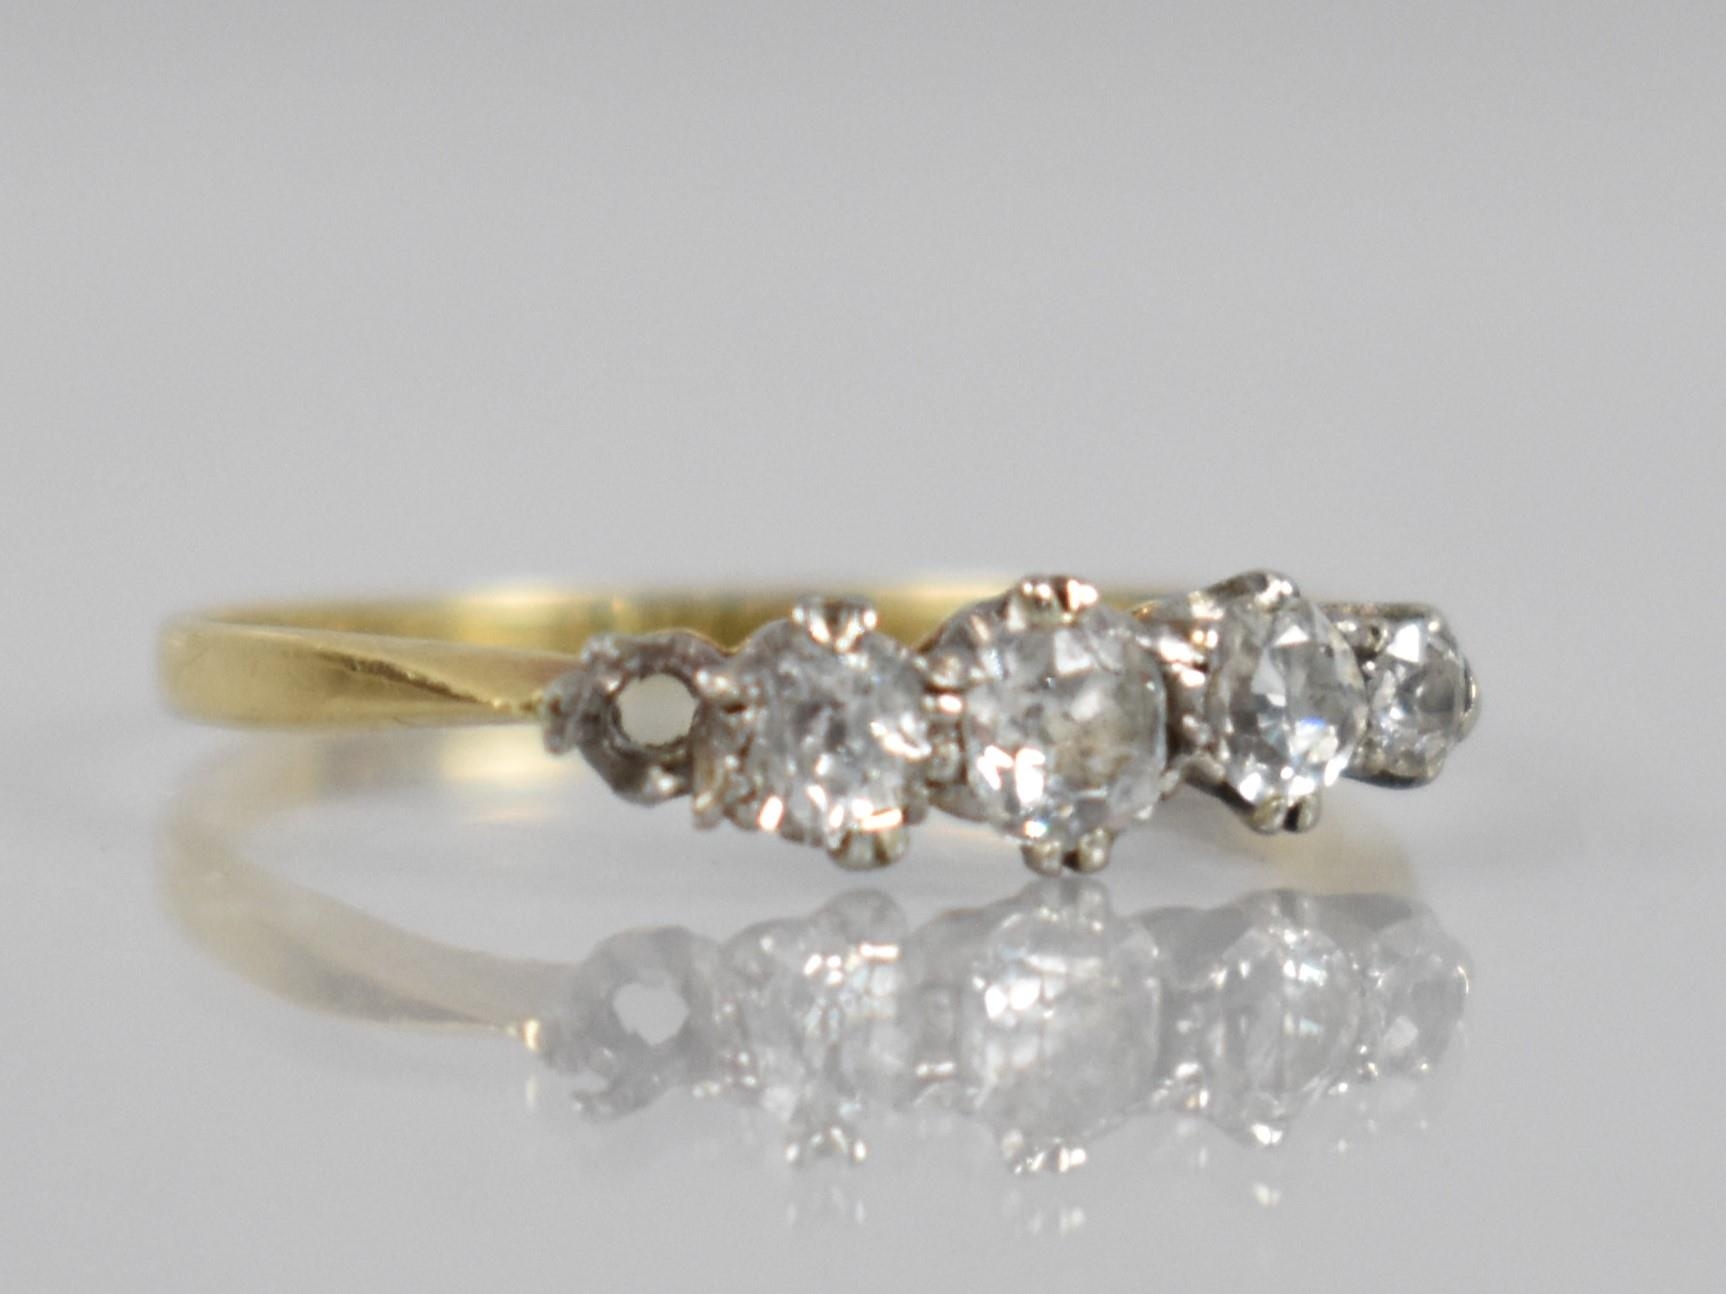 An Early 20th Century 18ct Gold and Diamond Five Stone Ring (Missing One Stone), Old Mixed/Mine - Image 3 of 4